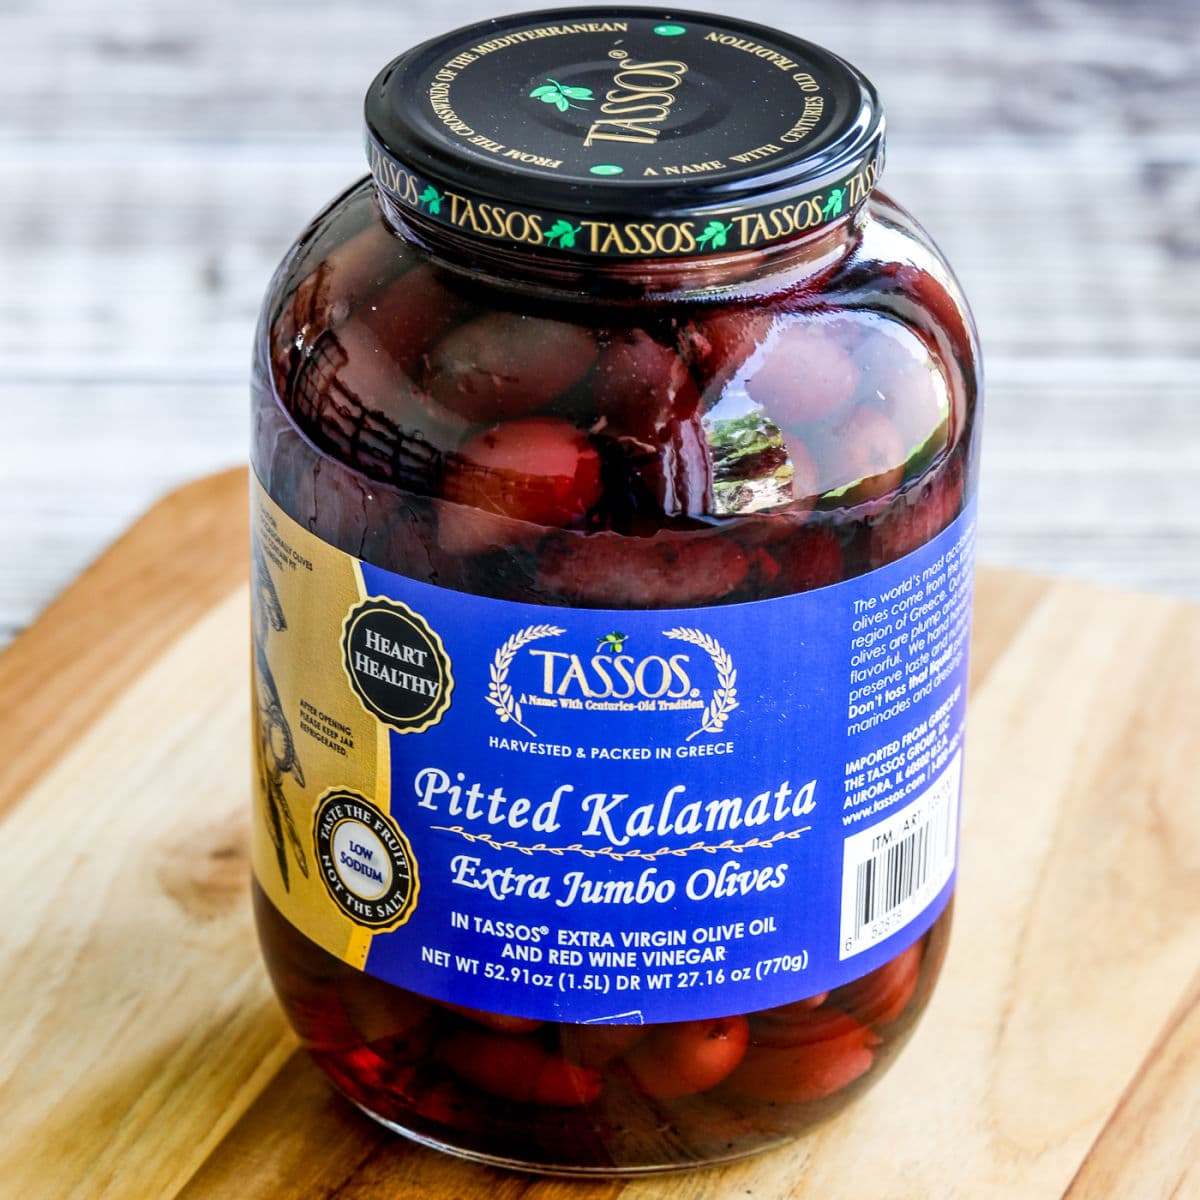 Square image of jar of Pitted Kalamata Olives on cutting board.